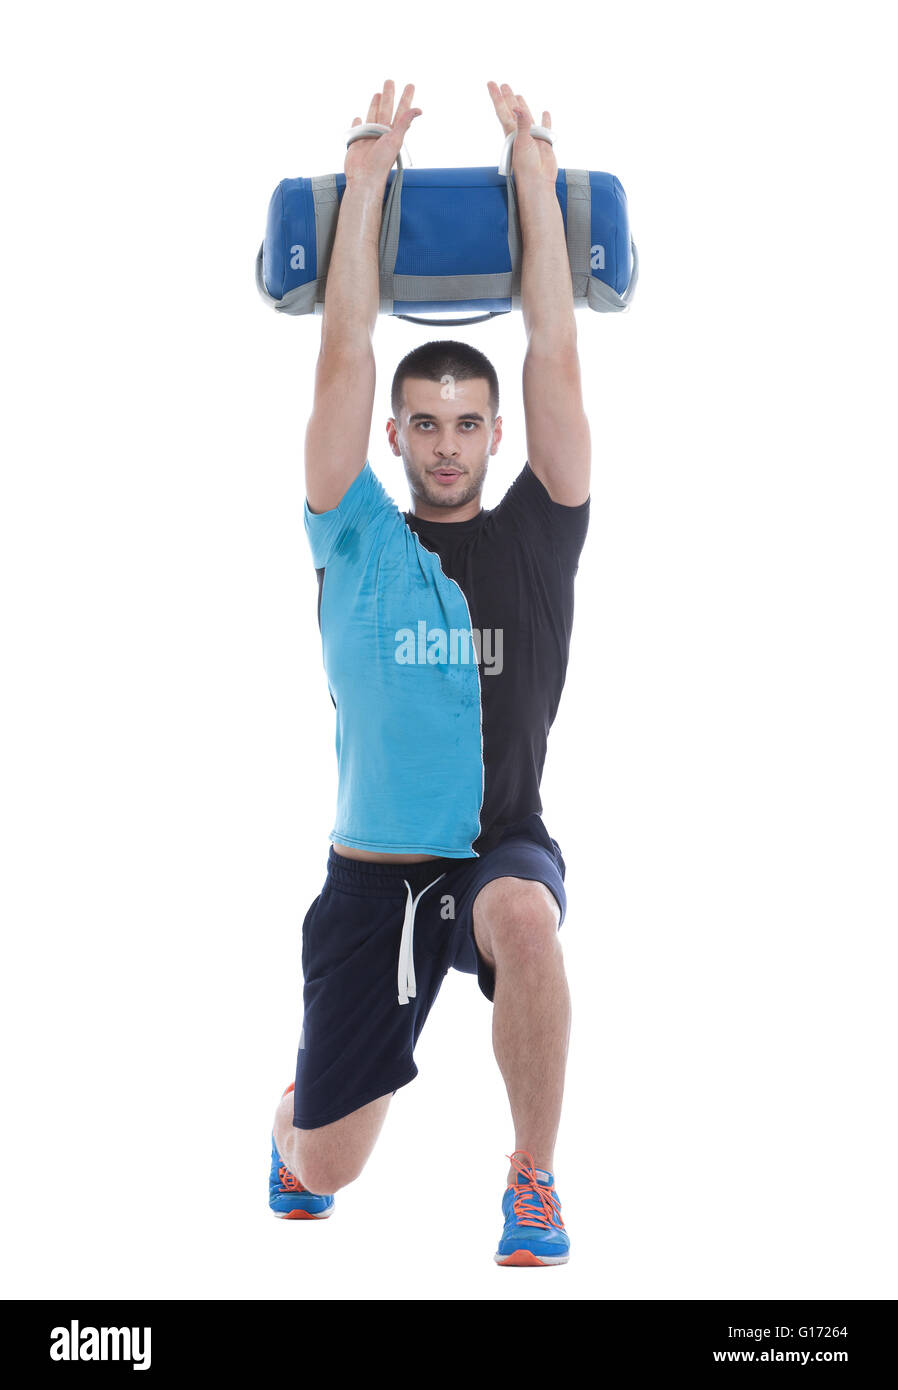 Fitness trainer doing a demonstration of core bag exercise. Image isolated on white background. Stock Photo